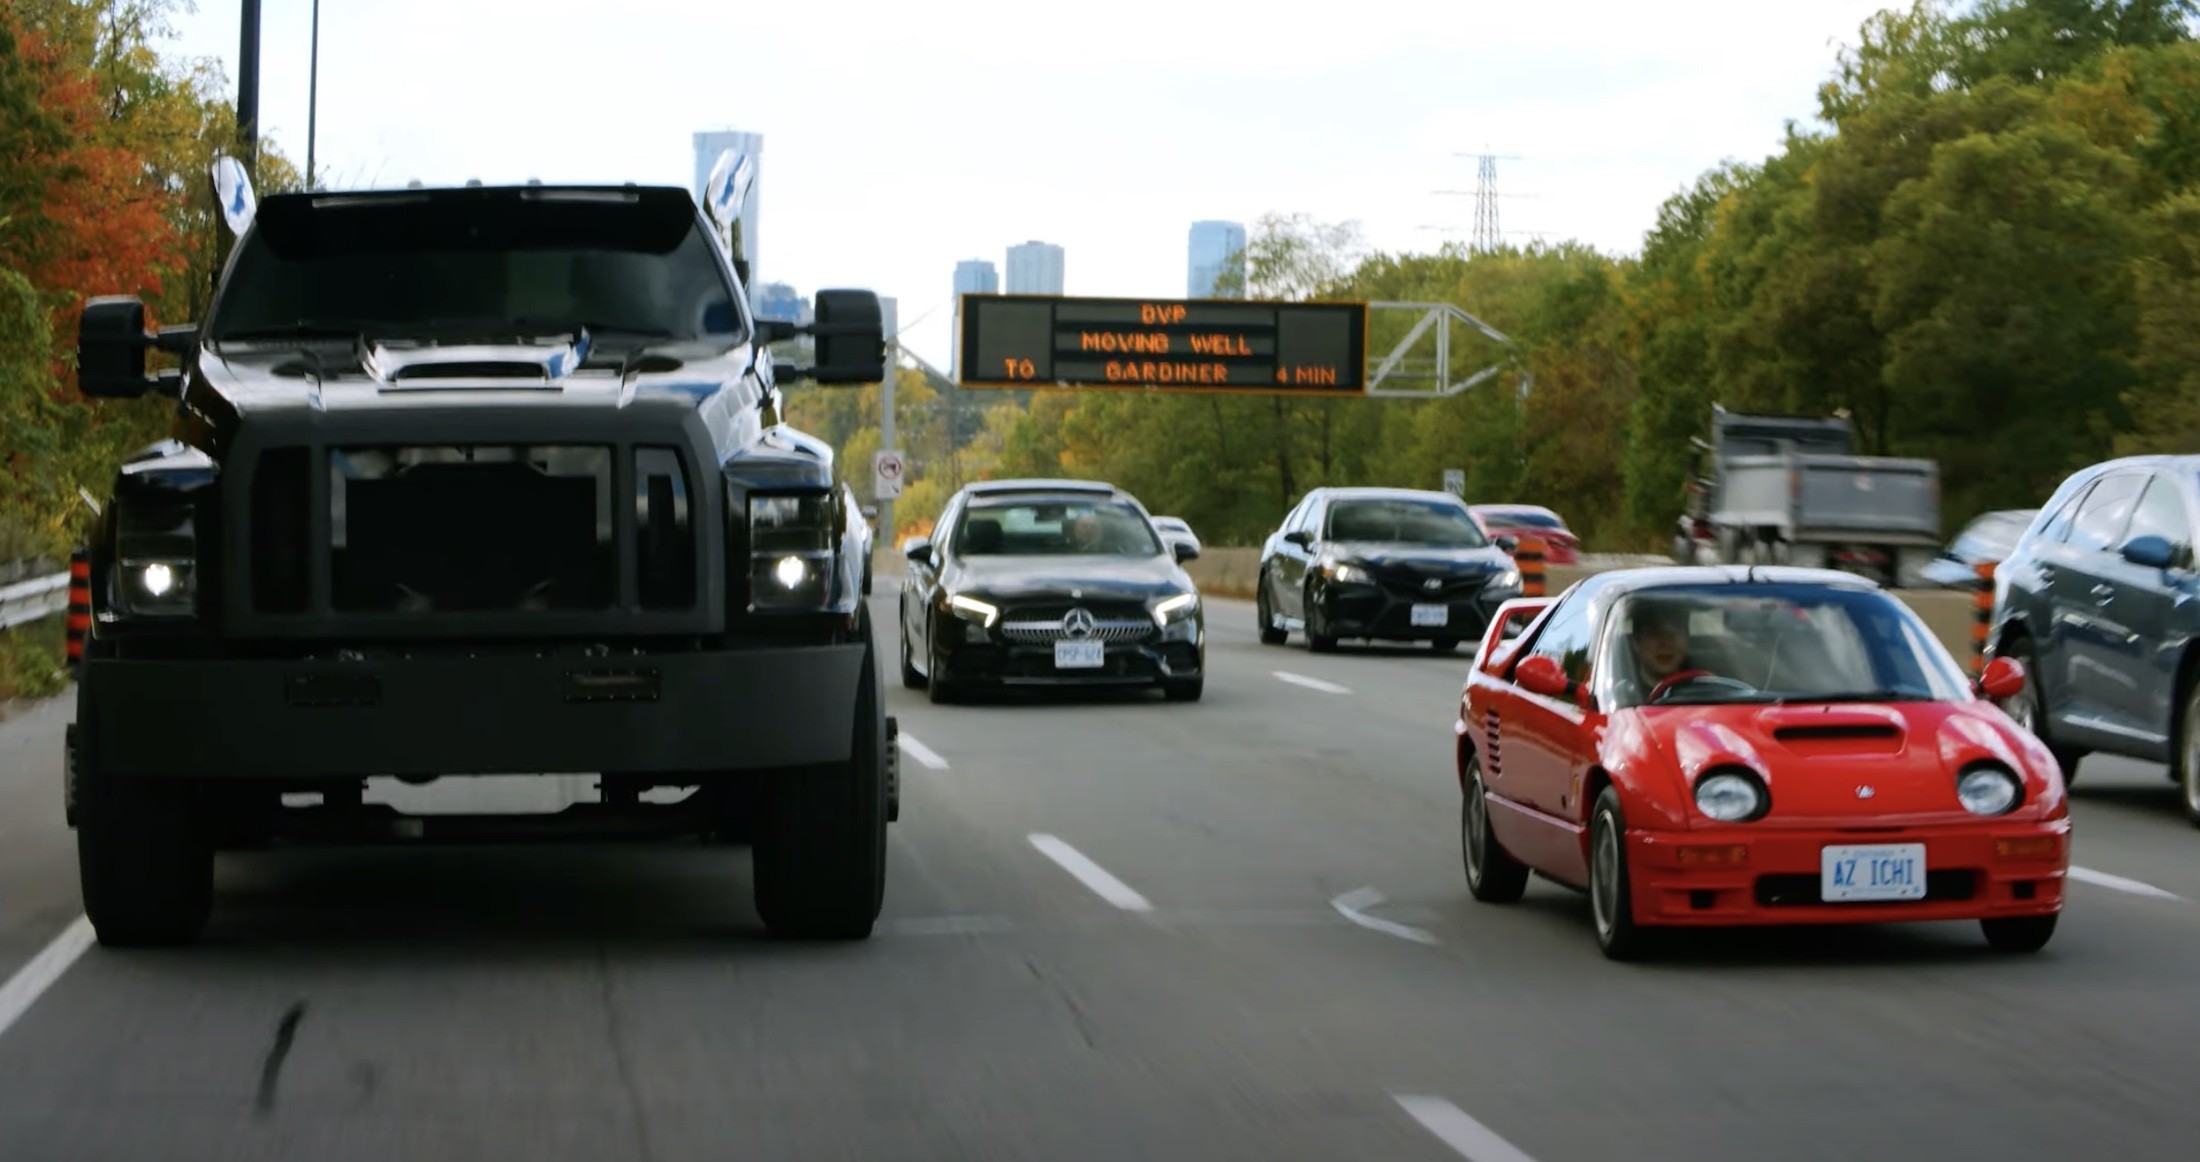 Ford F-650 Super Truck Makes No Sense Whatsoever, It Is a Bully on the Road  - autoevolution